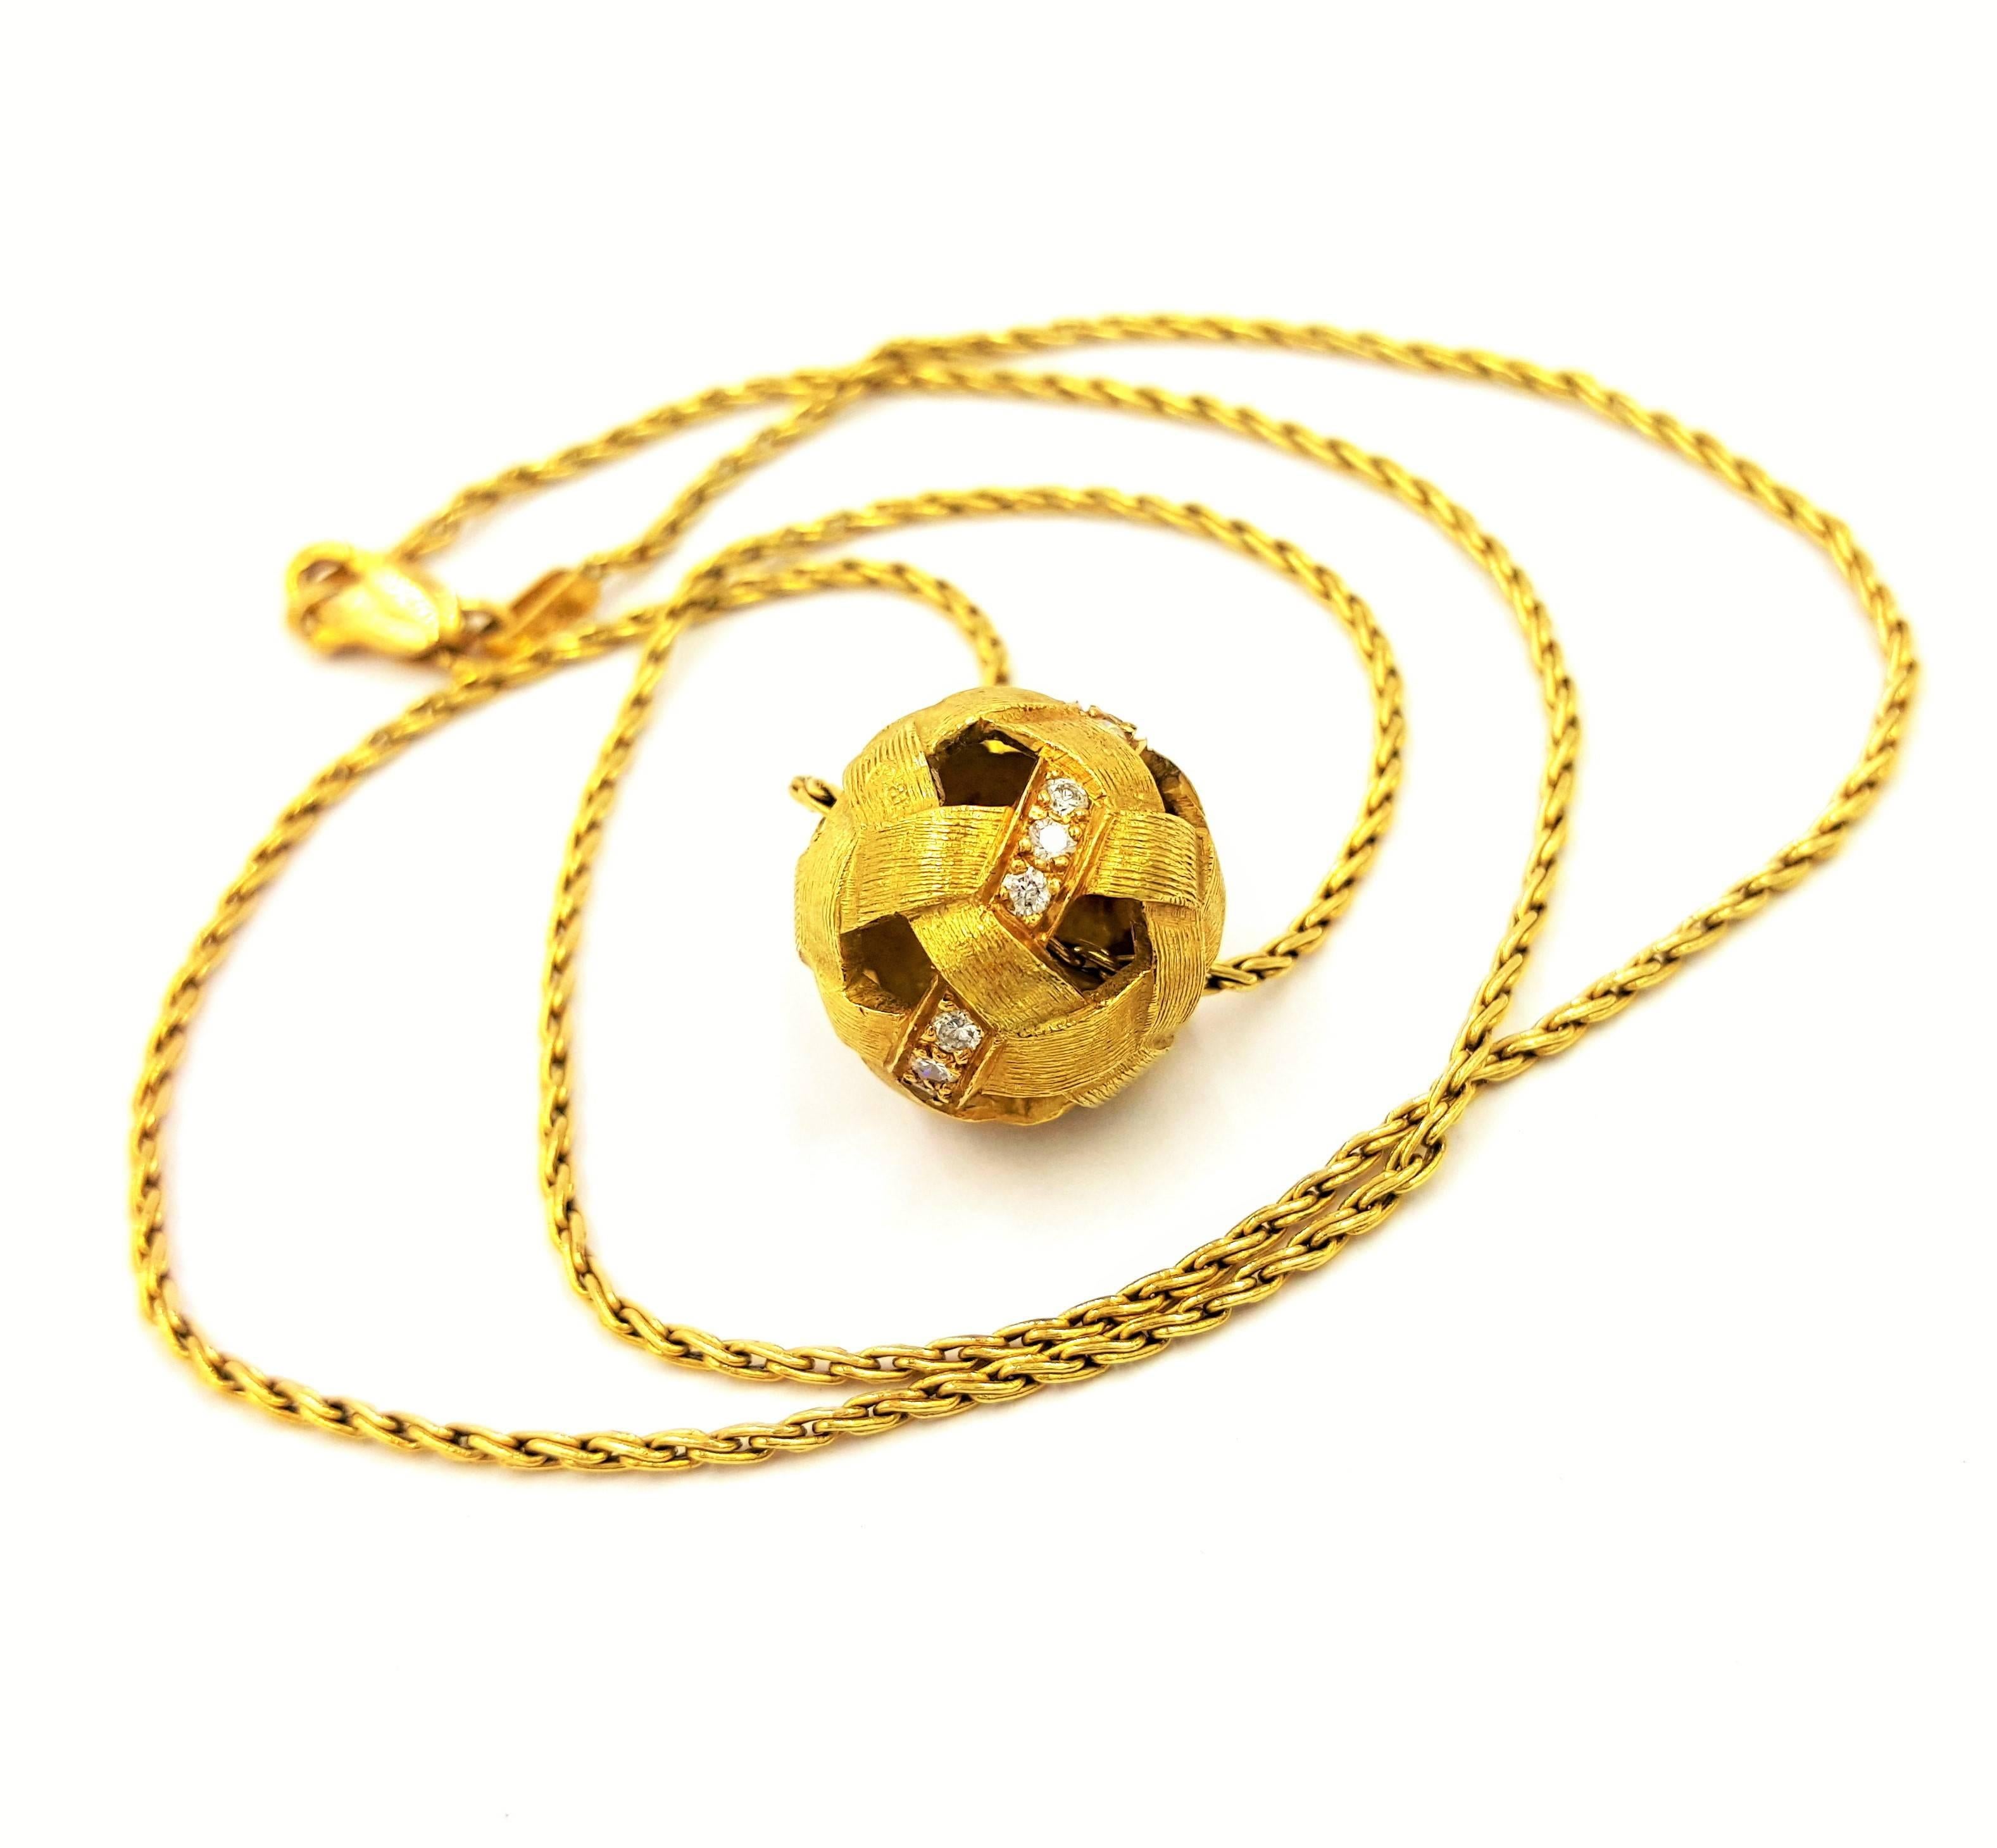 Etienne Perret French Diamond Gold Soccer Ball Pendant and Chain in 18KT Gold For Sale 2